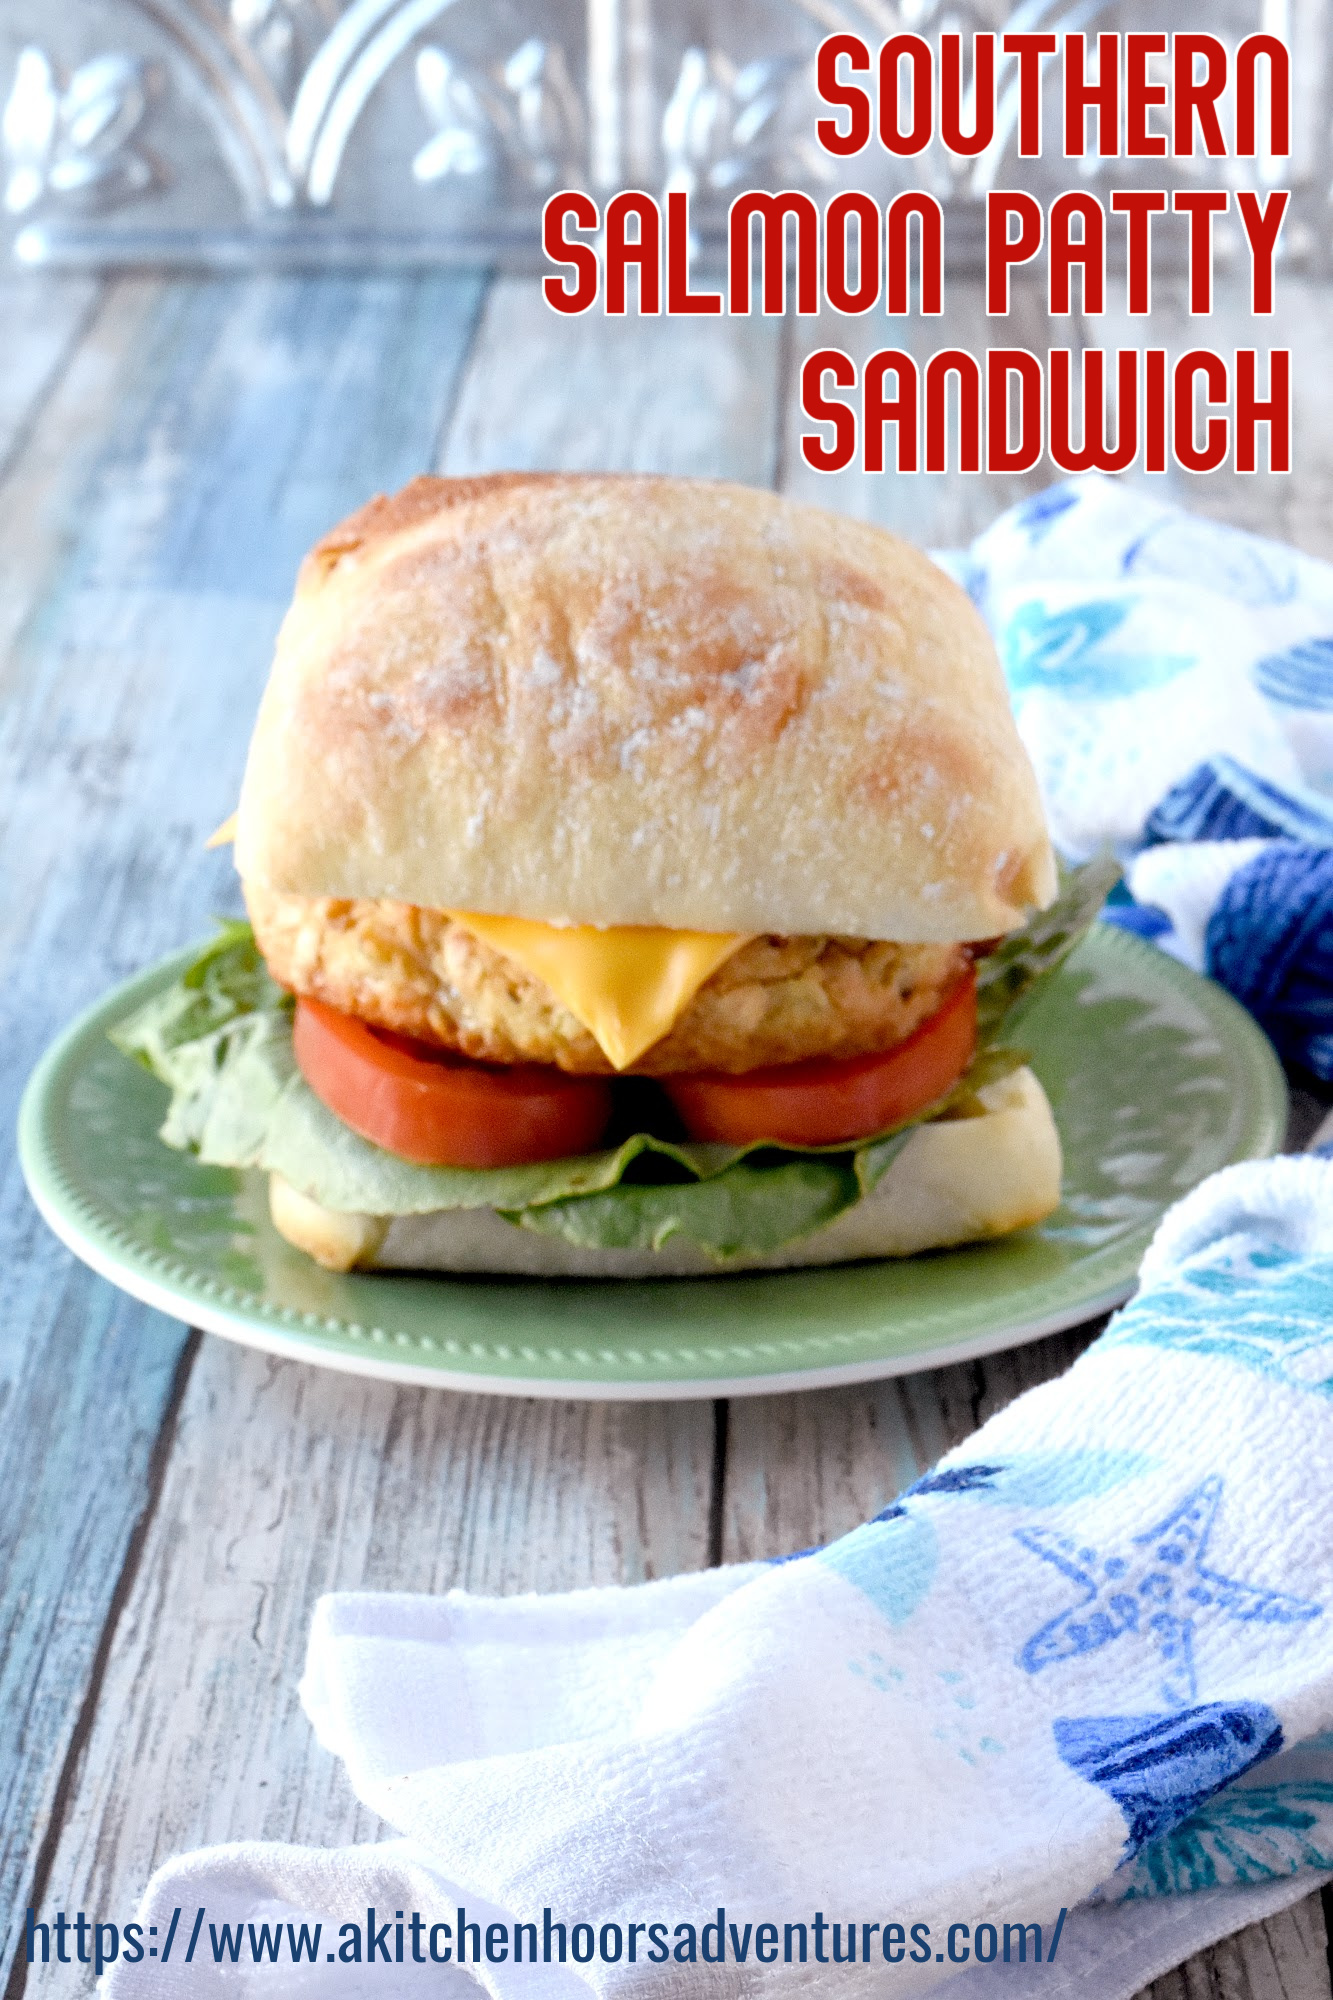 Southern Salmon Patty Sandwiches take delicious salmon patties and turns them into a fun sandwich for your family. It’s also a budget friendly meal for your family.  #OurFamilyTable #budgetfriendly #pantryrecipe #easyrecipe